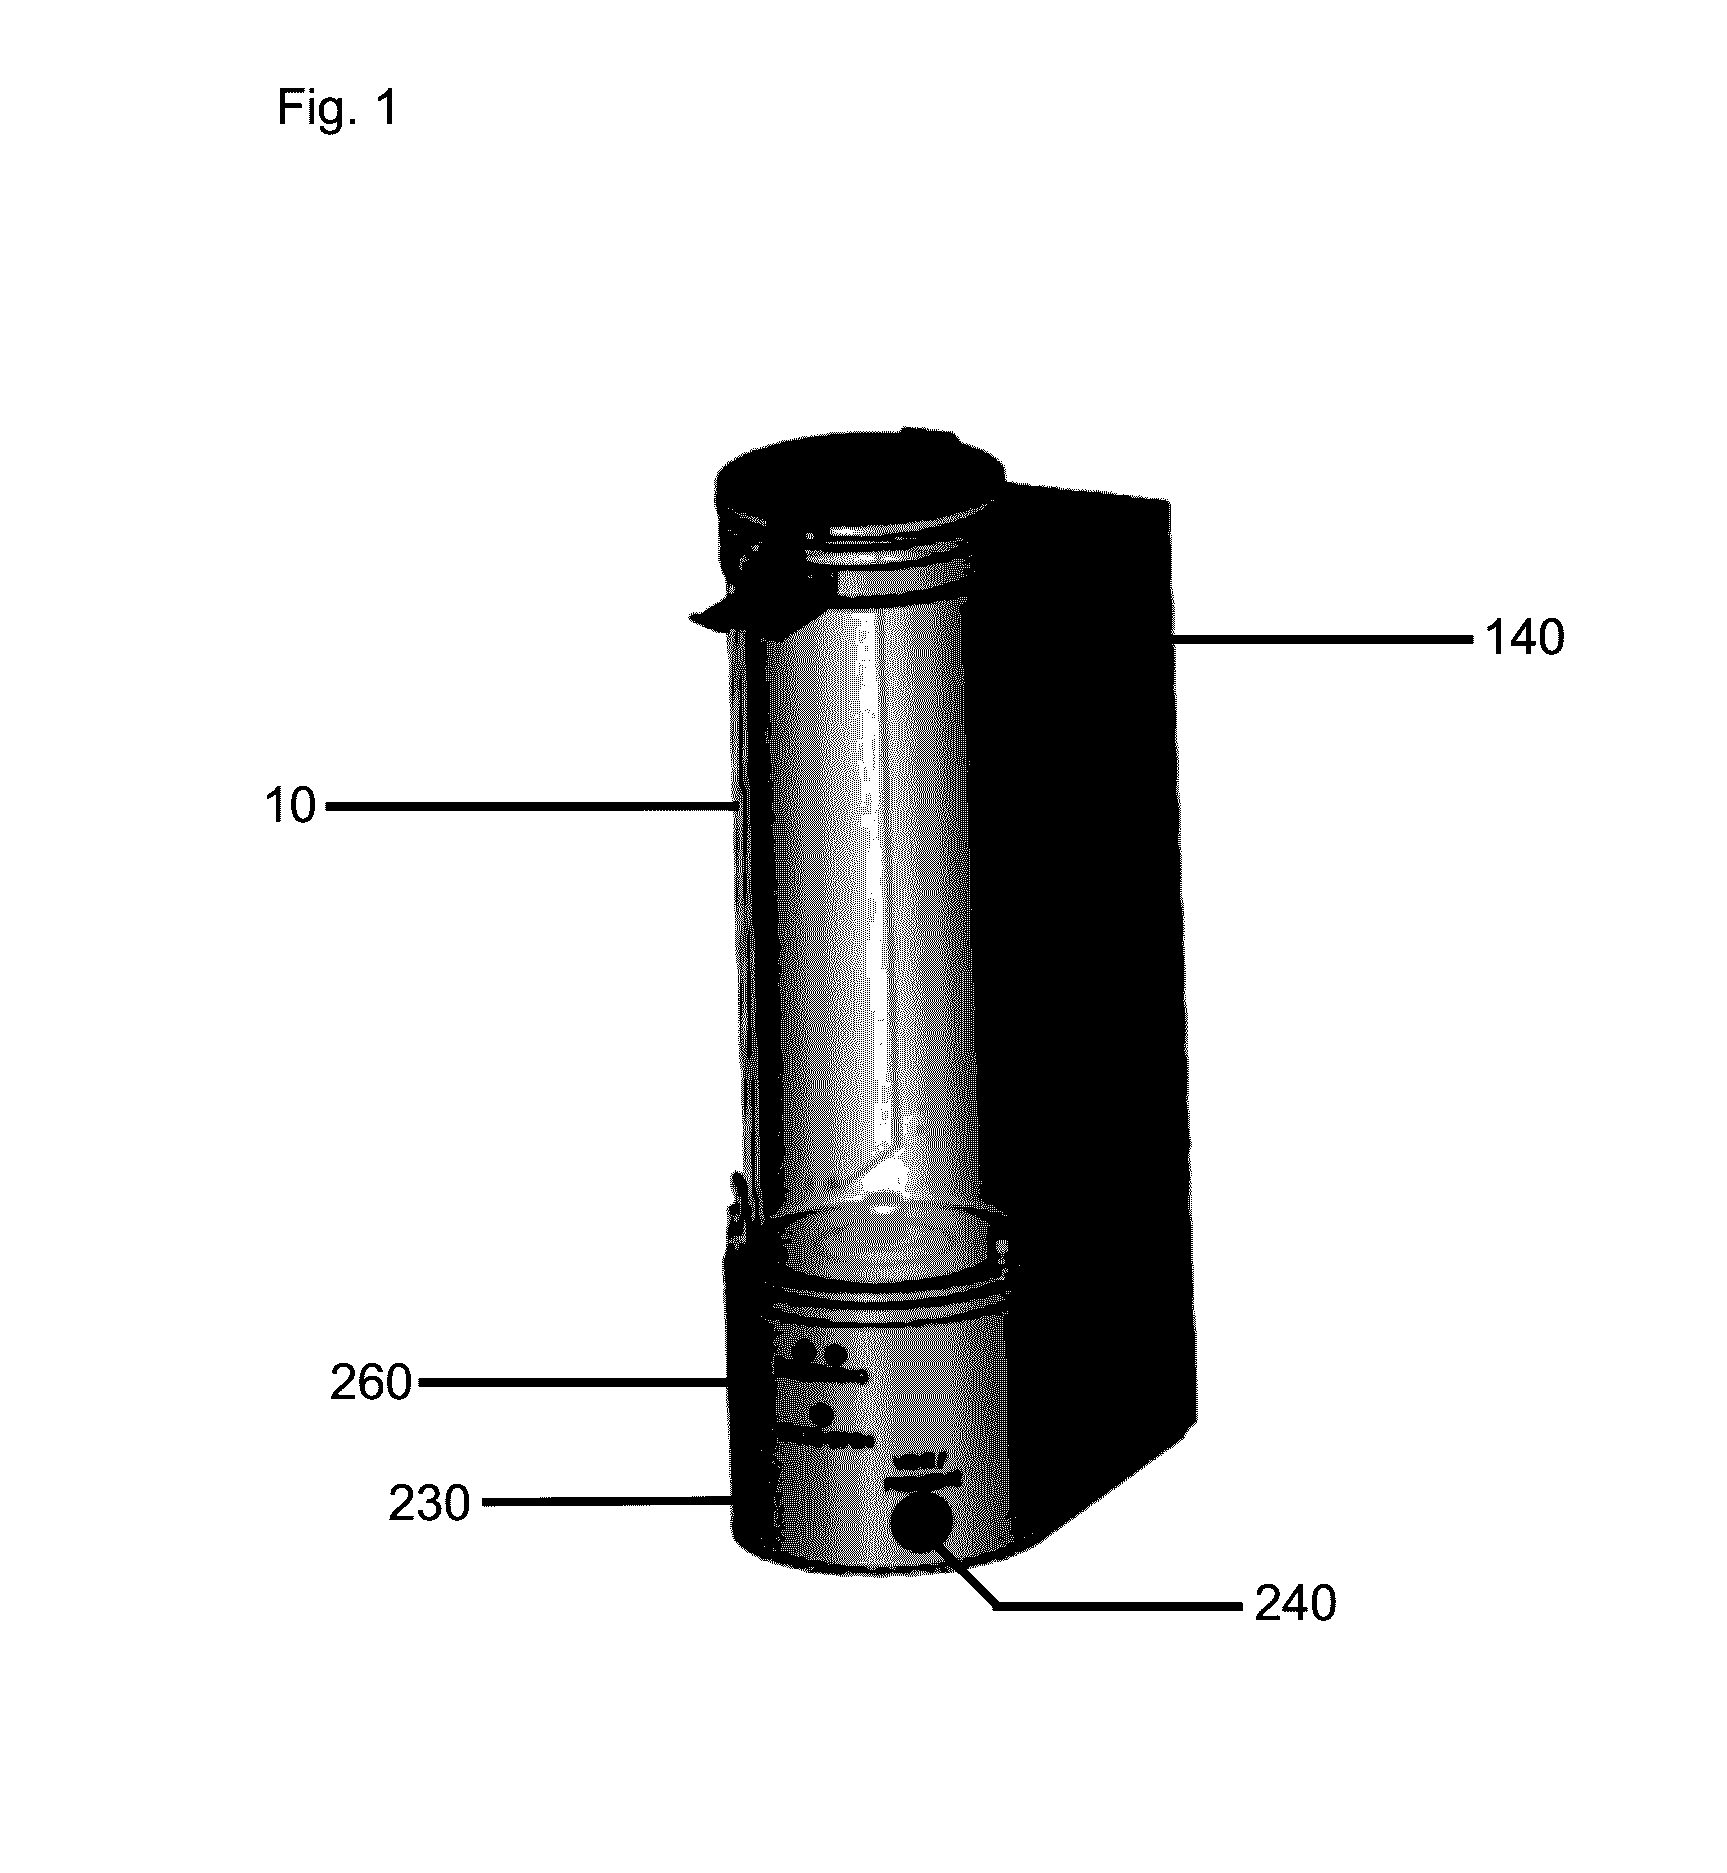 Apparatus with mobile reusable airtight container assembly utilizing pressurized gas to maintain freshness of roasted coffee beans or grounds